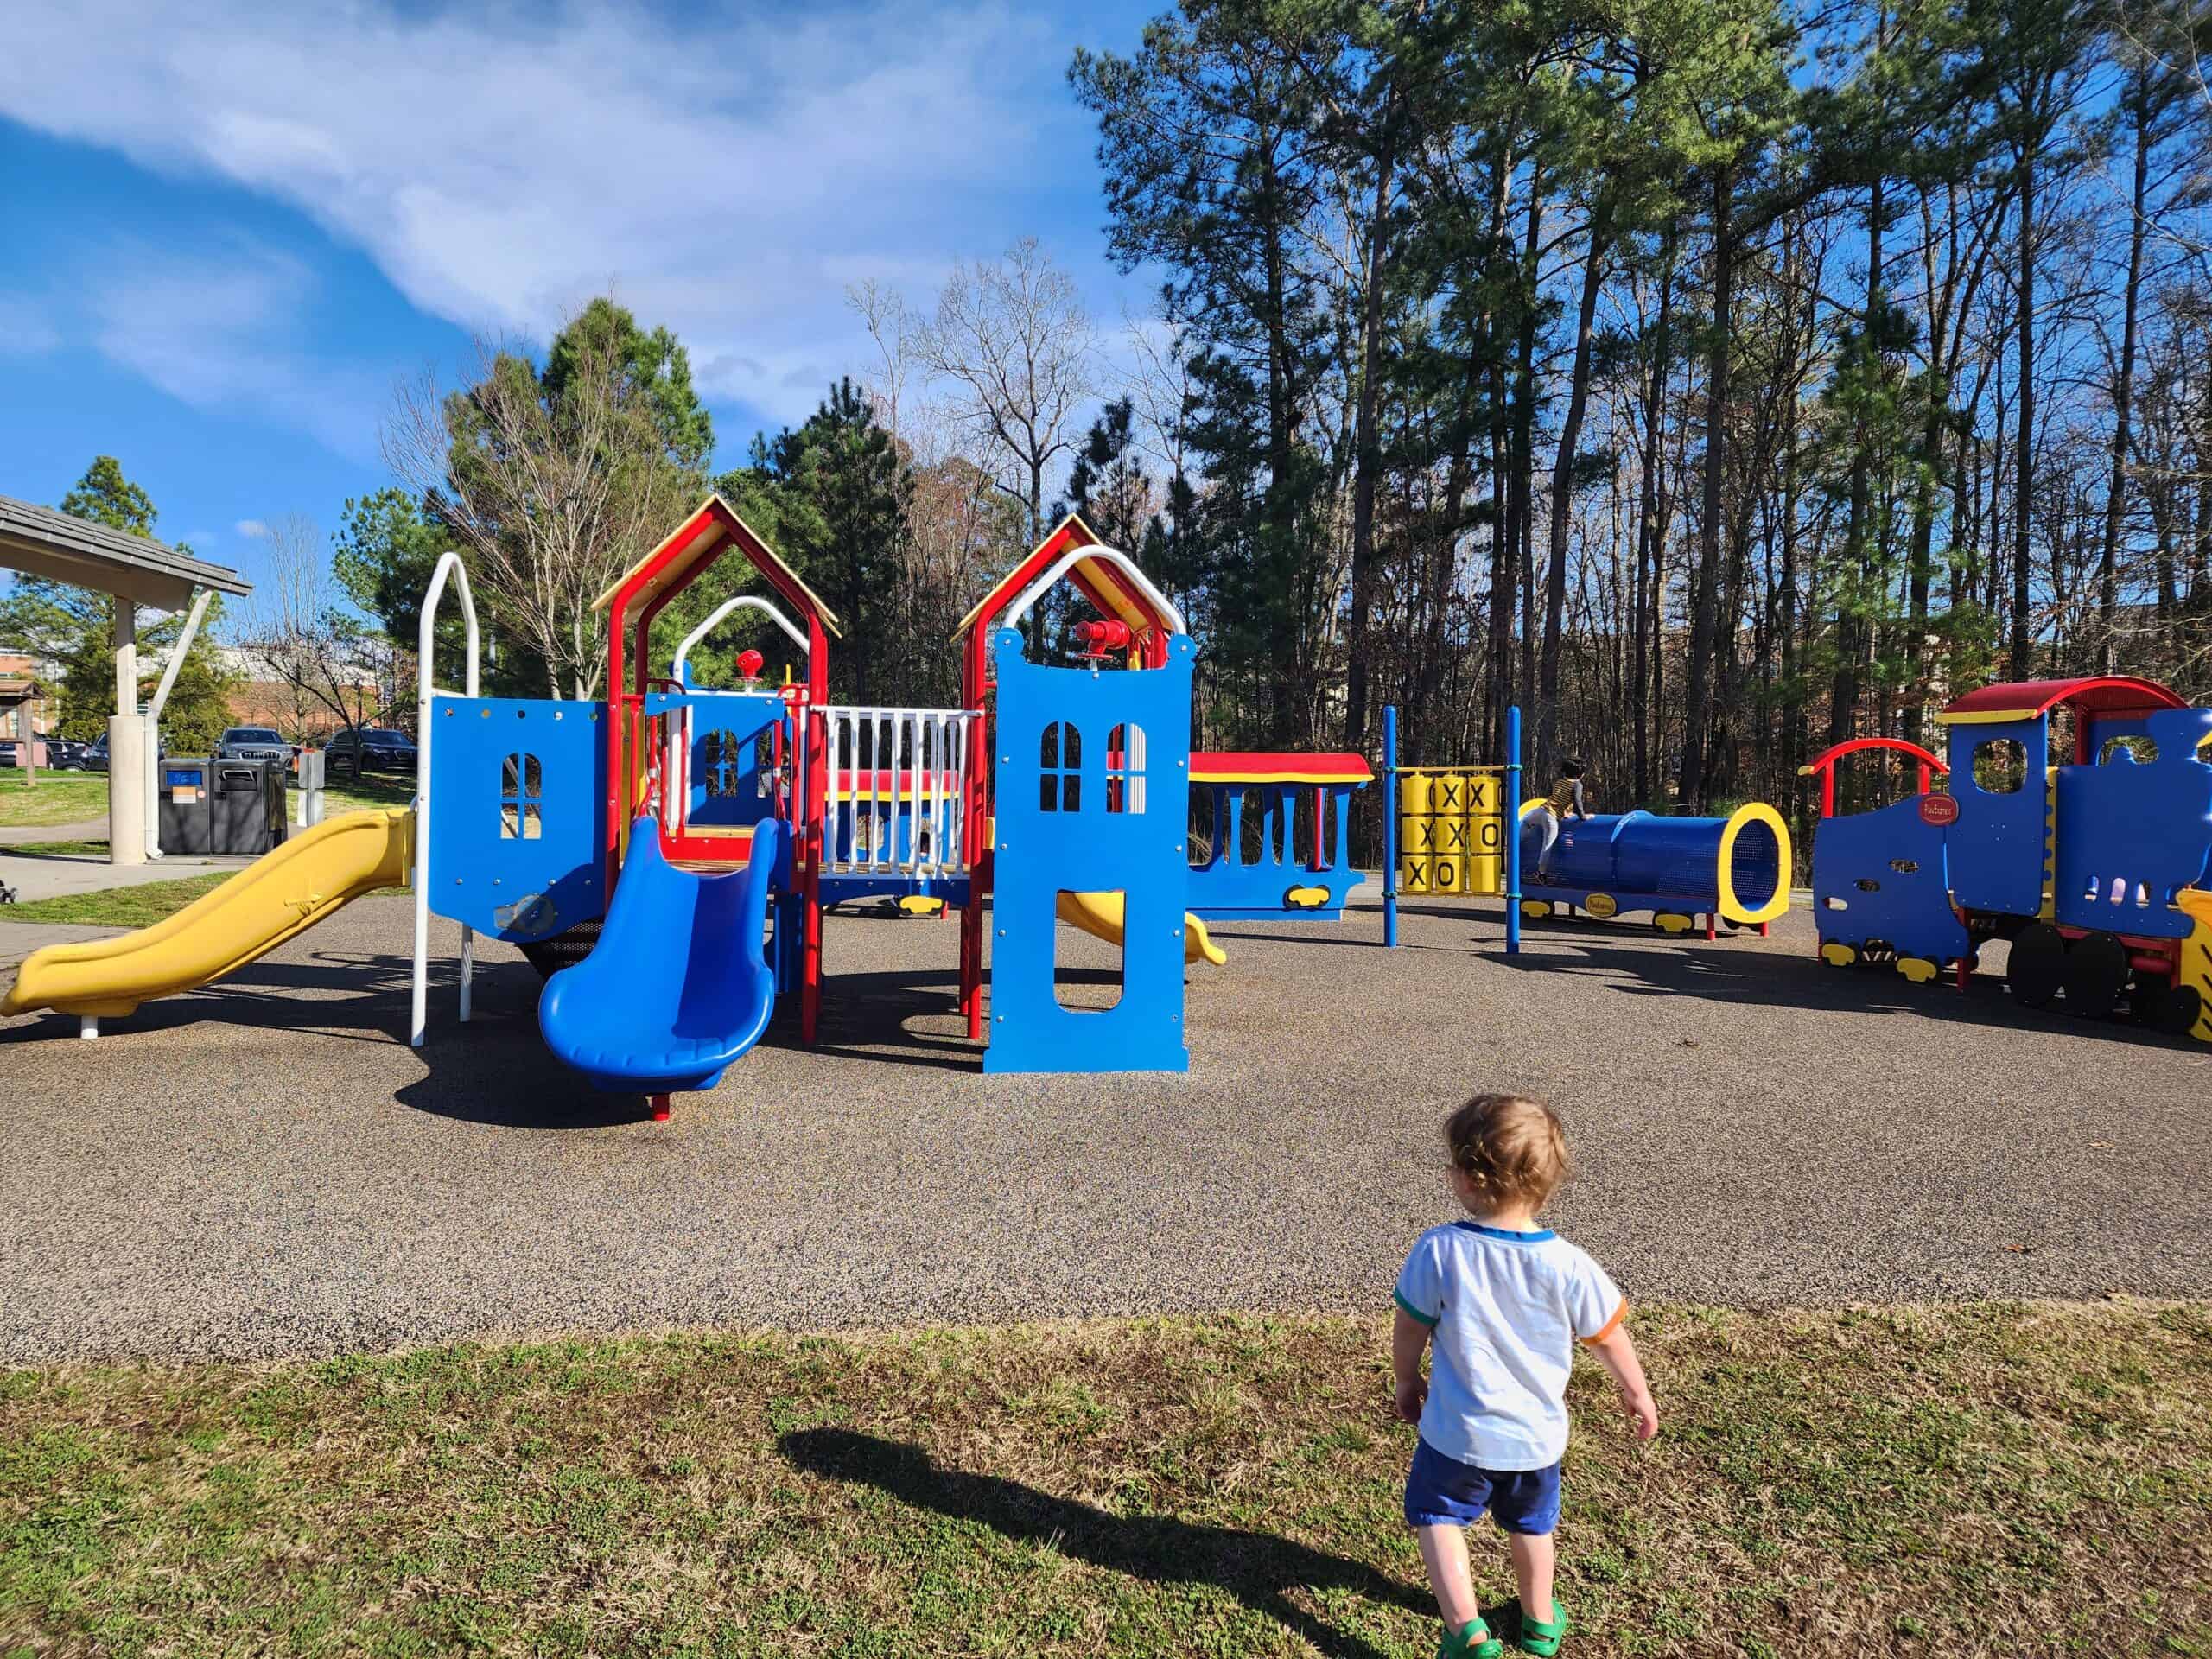 A young child stands at the edge of a playground, gazing at colorful play structures including a blue slide, red and yellow playhouses, and a train-themed playset, all under a clear blue sky.